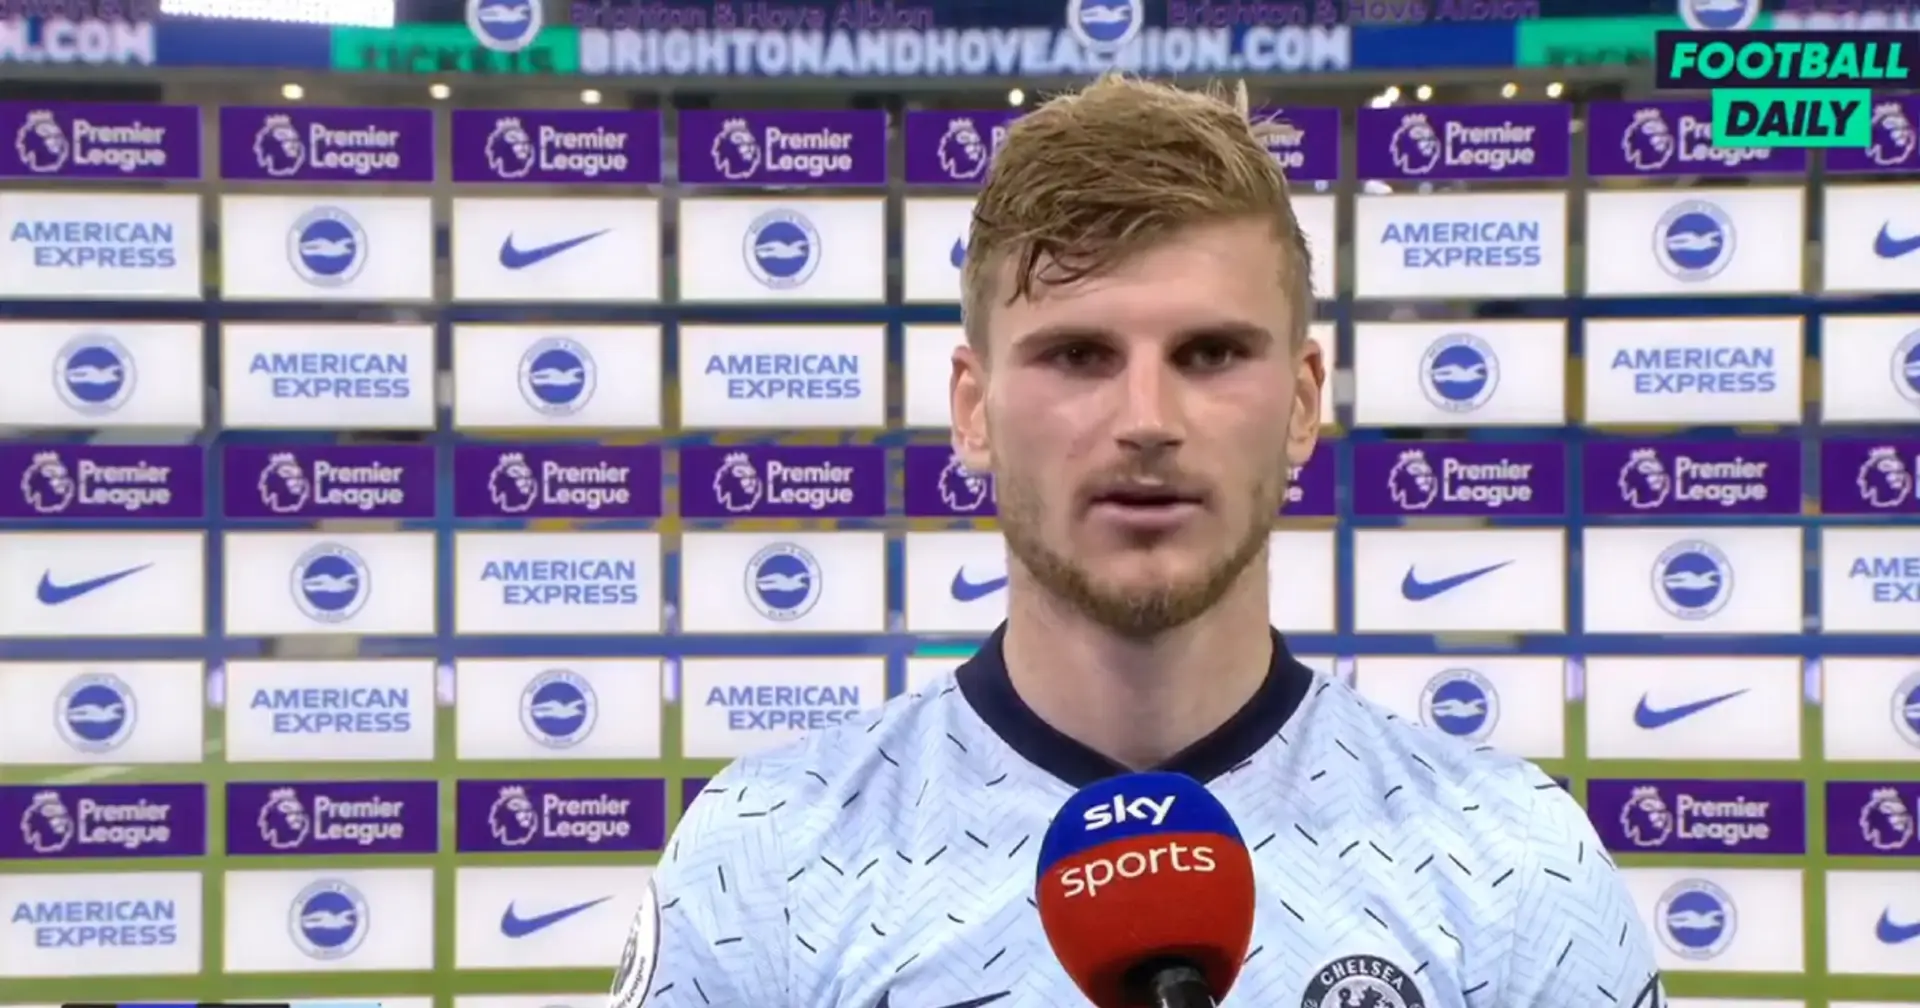 'I played against 3 massive defenders, you don't have that in Germany': Werner reacts to his Chelsea debut